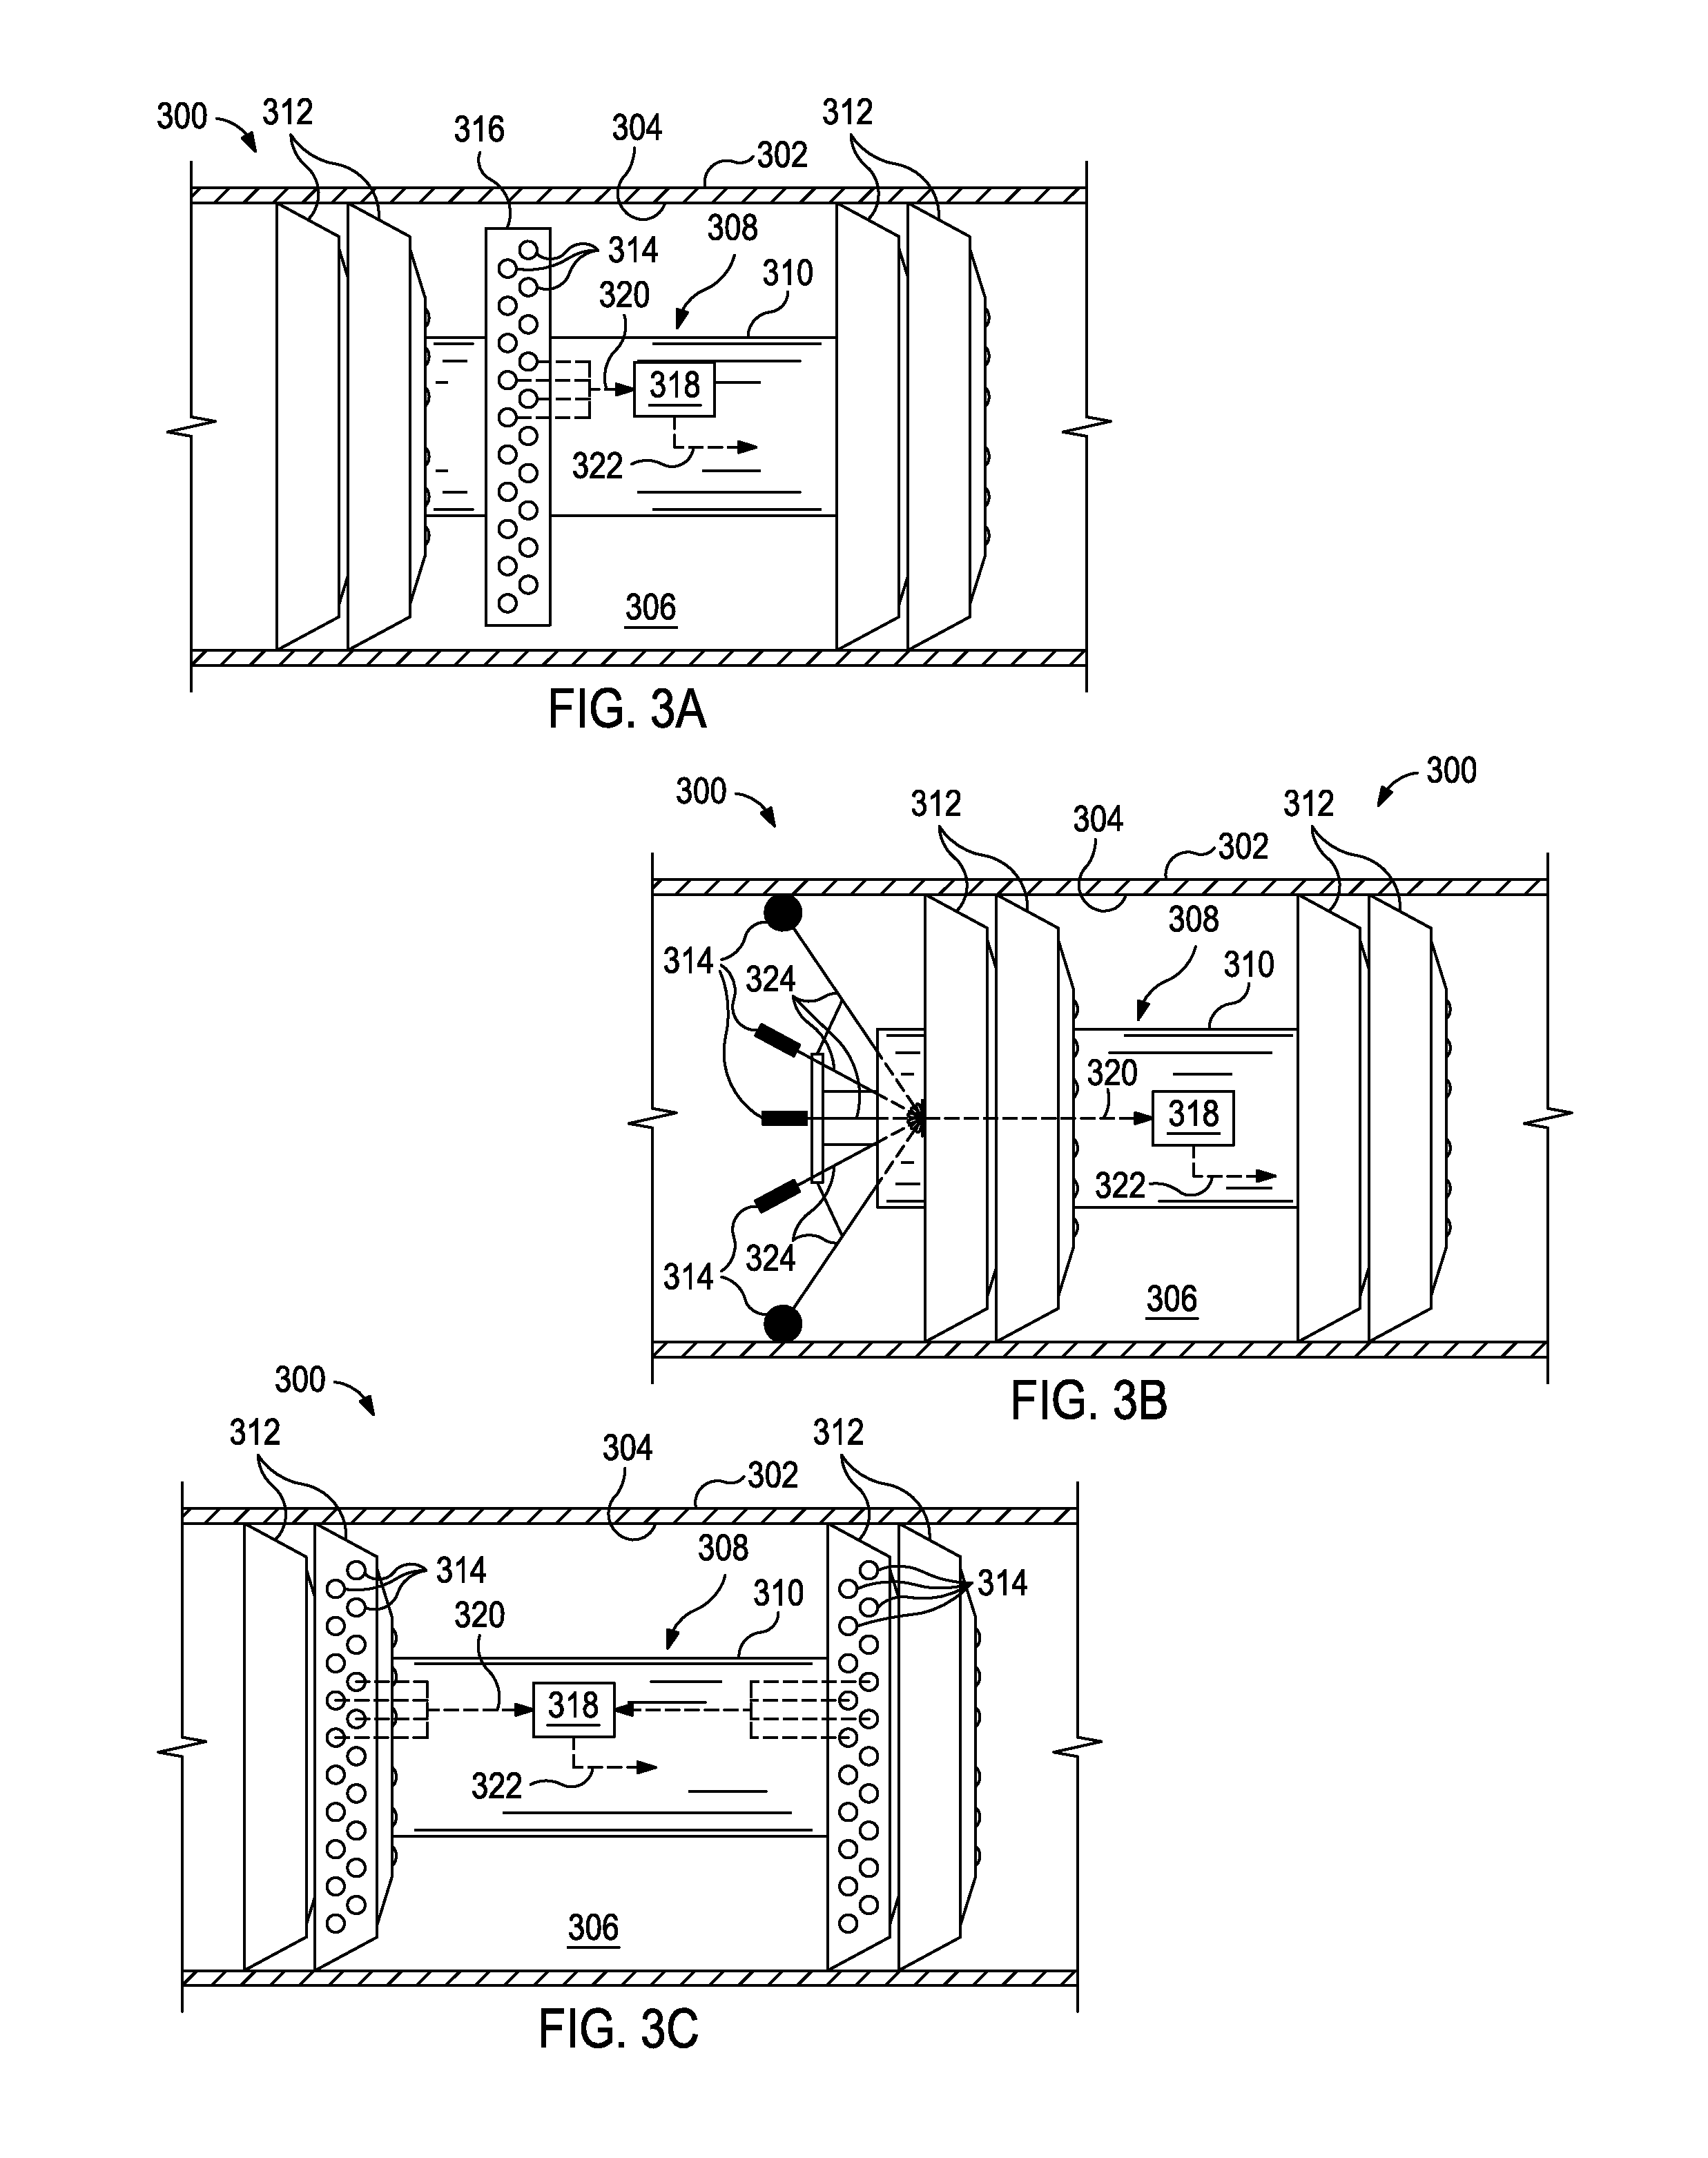 Systems and Methods for Inspecting and Monitoring a Pipeline